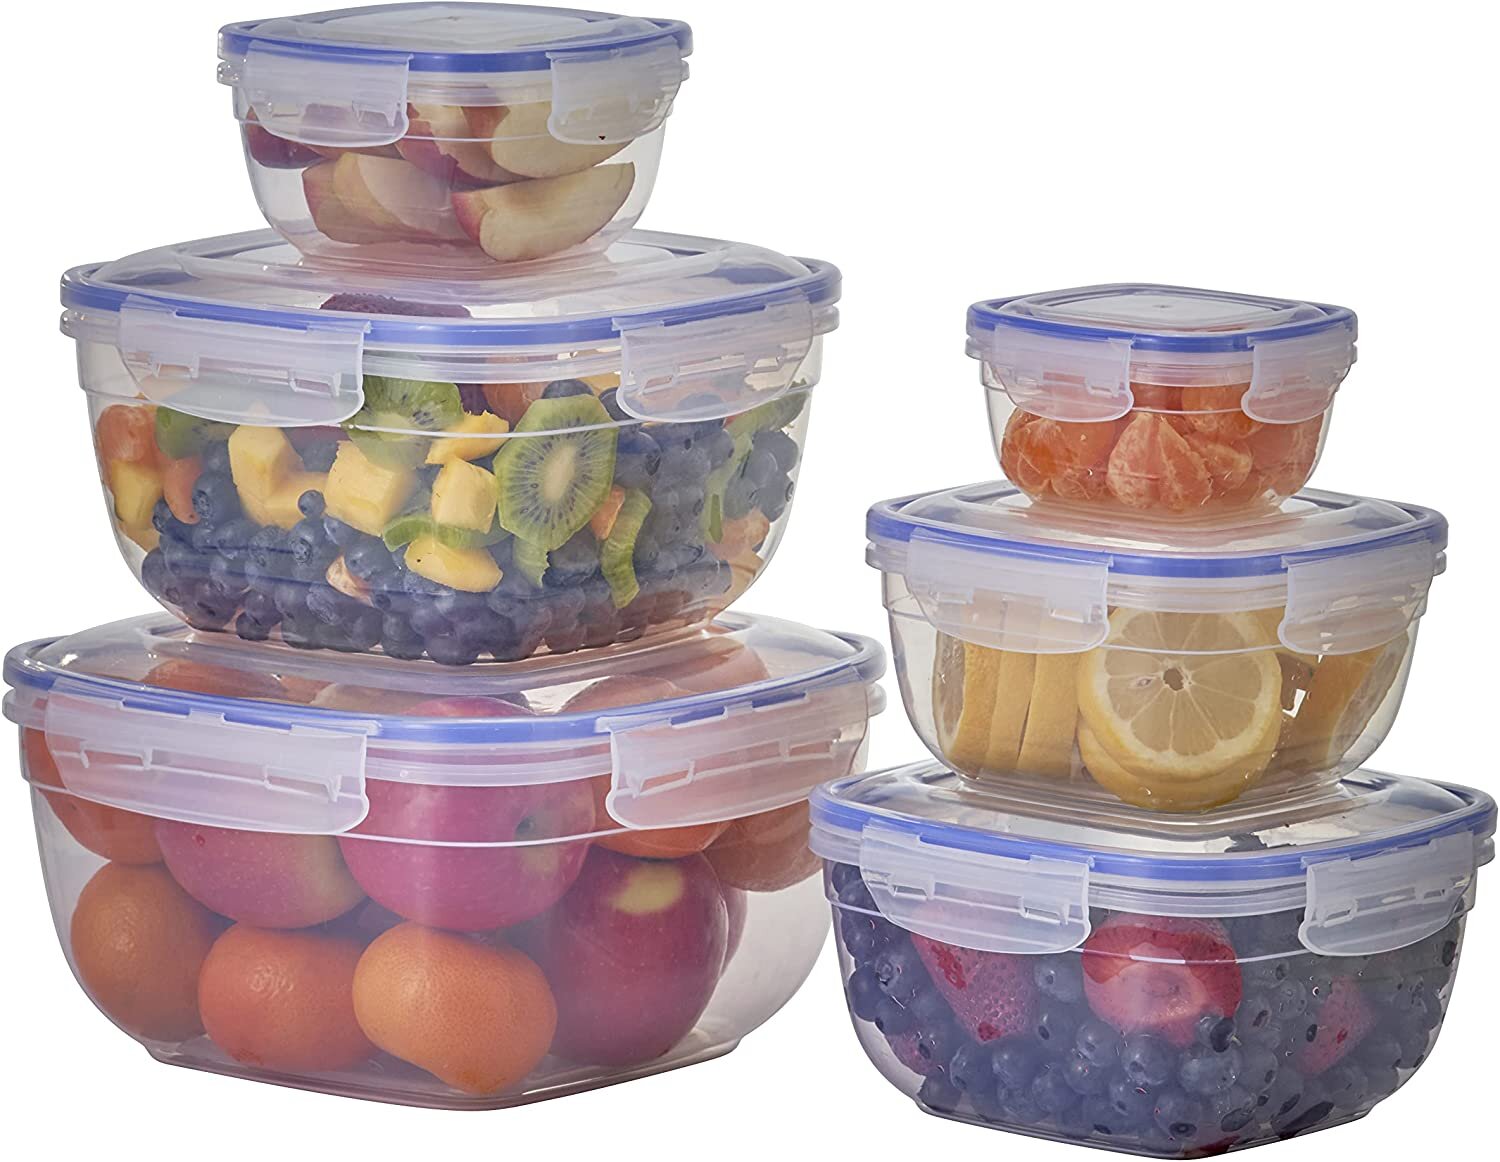 Buddeez Store N' Pour 46 Cup Food Storage Container Set & Reviews